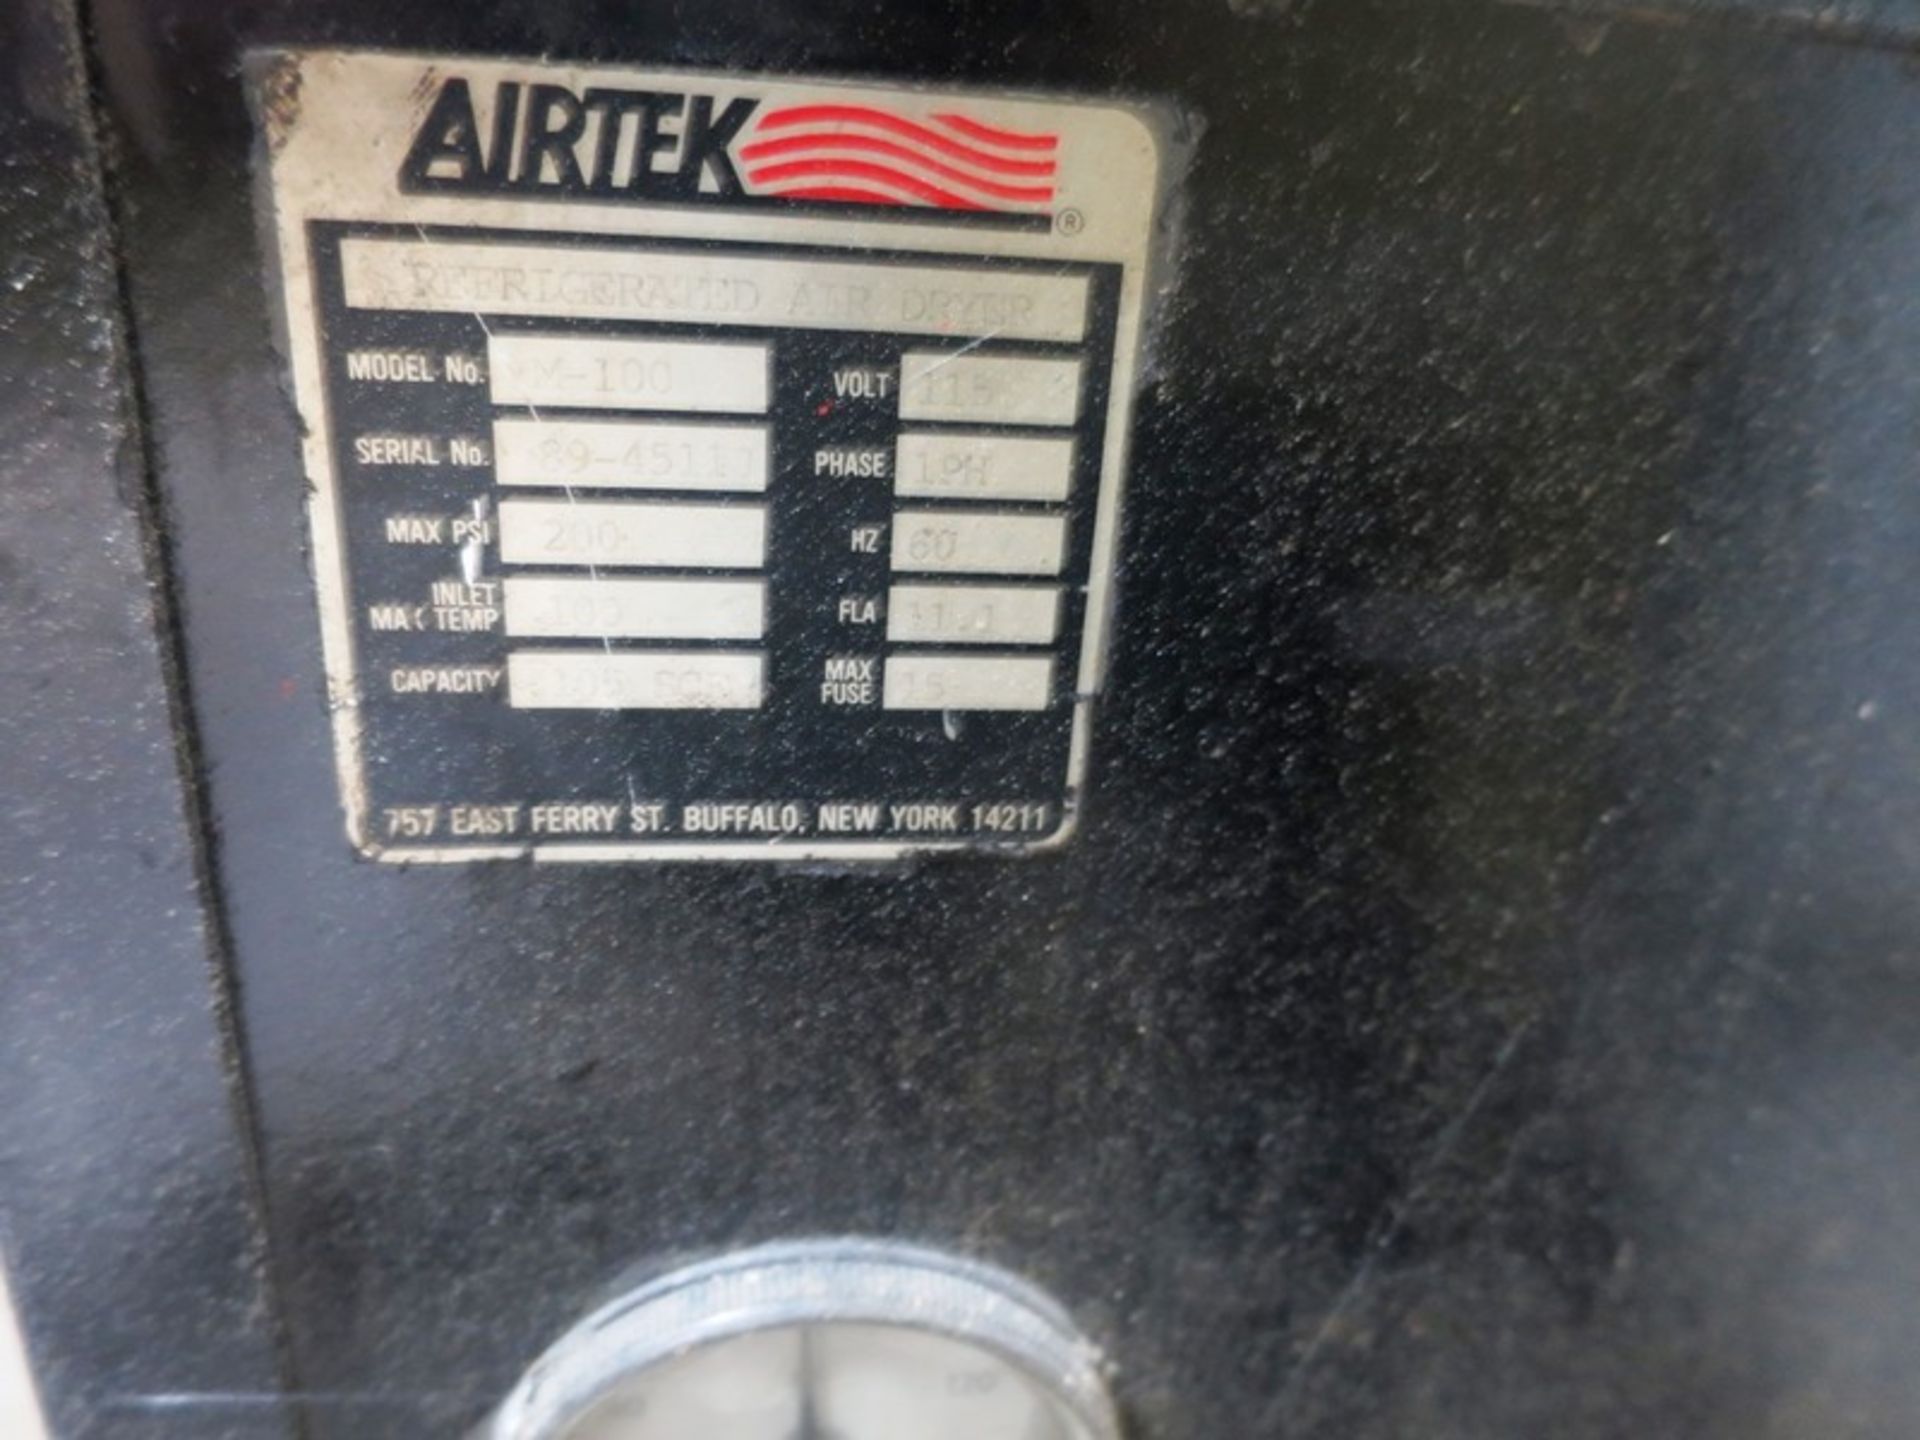 10HP Air Compressor with Airtek M-100 Air Dryer - Image 2 of 2